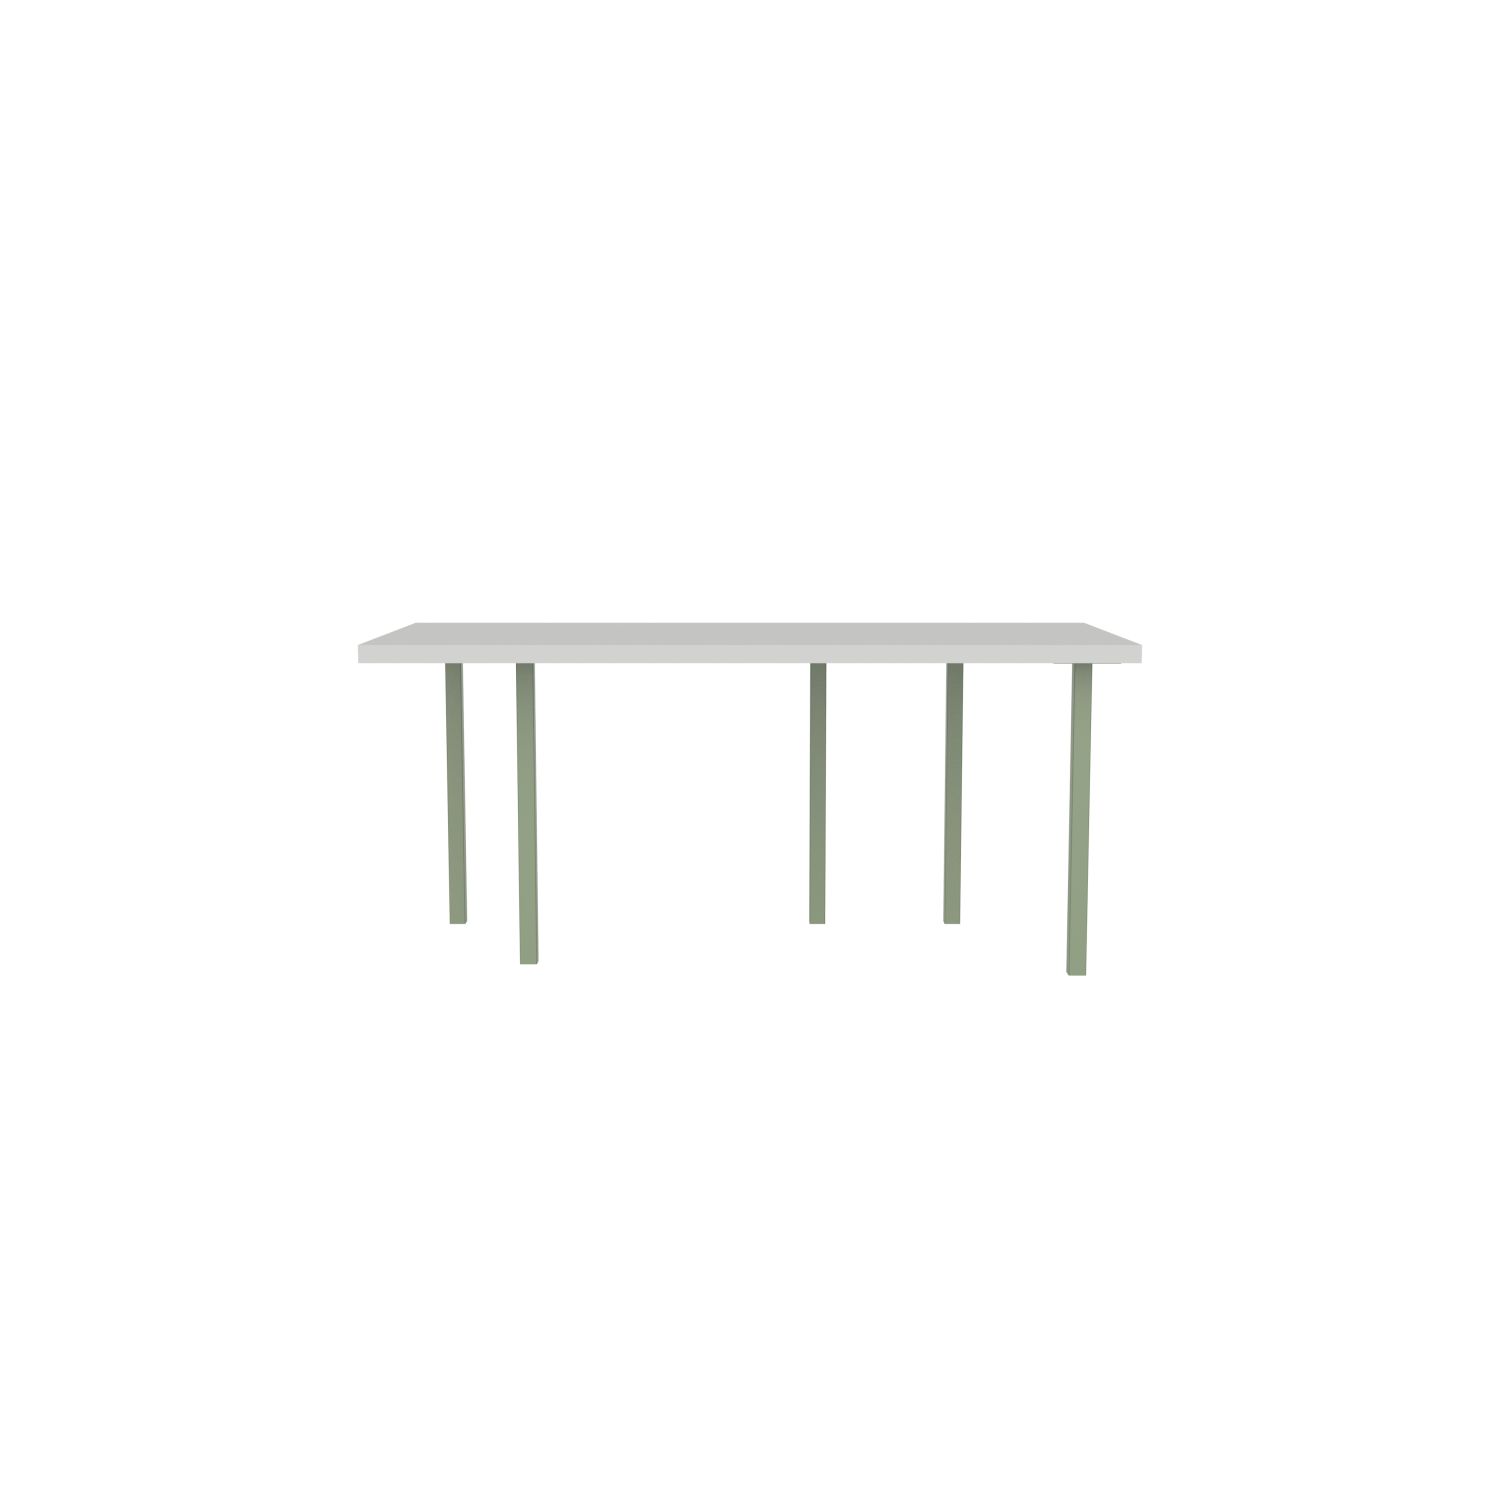 lensvelt bbrand table five fixed heigt 80x172 hpl boring grey 50 mm price level 1 green ral6021